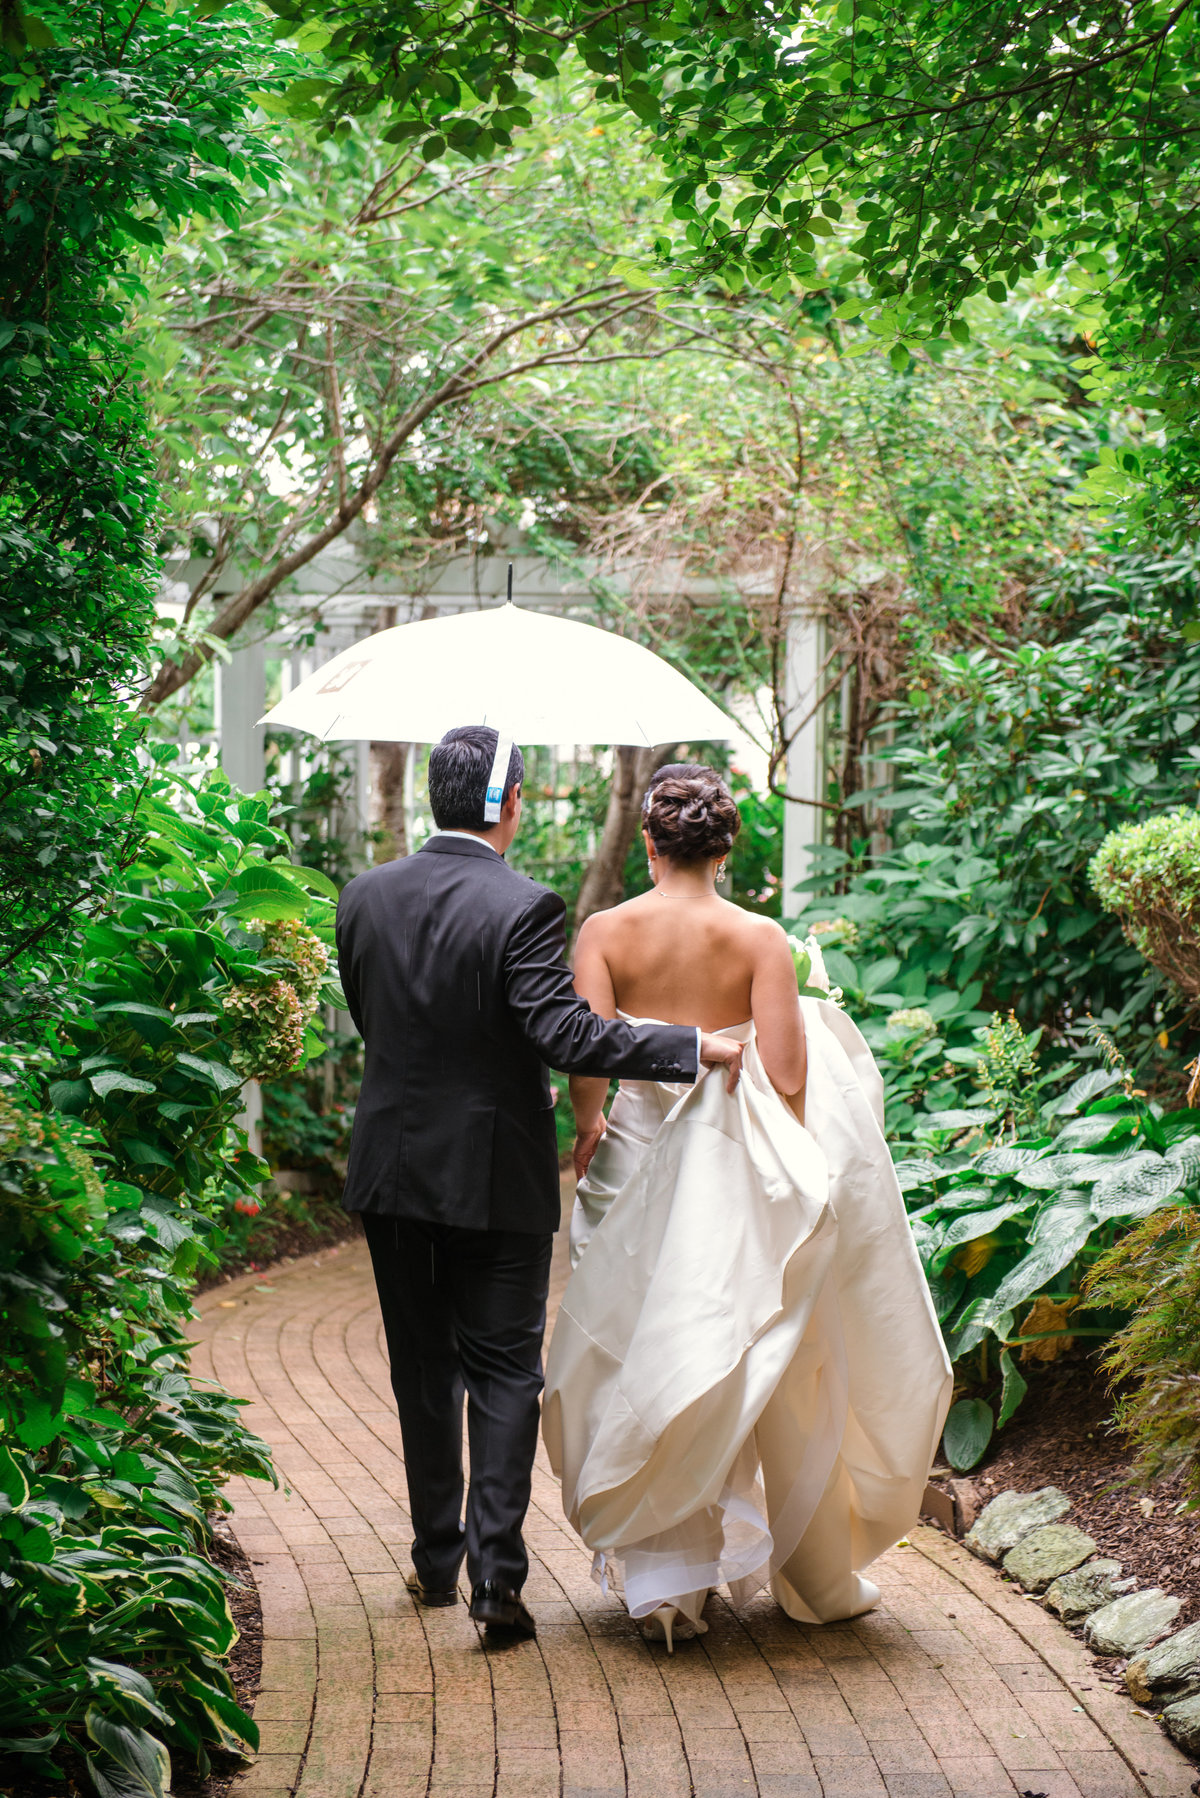 photo of groom holding umbrella and walking with his bride outside The Garden City Hotel